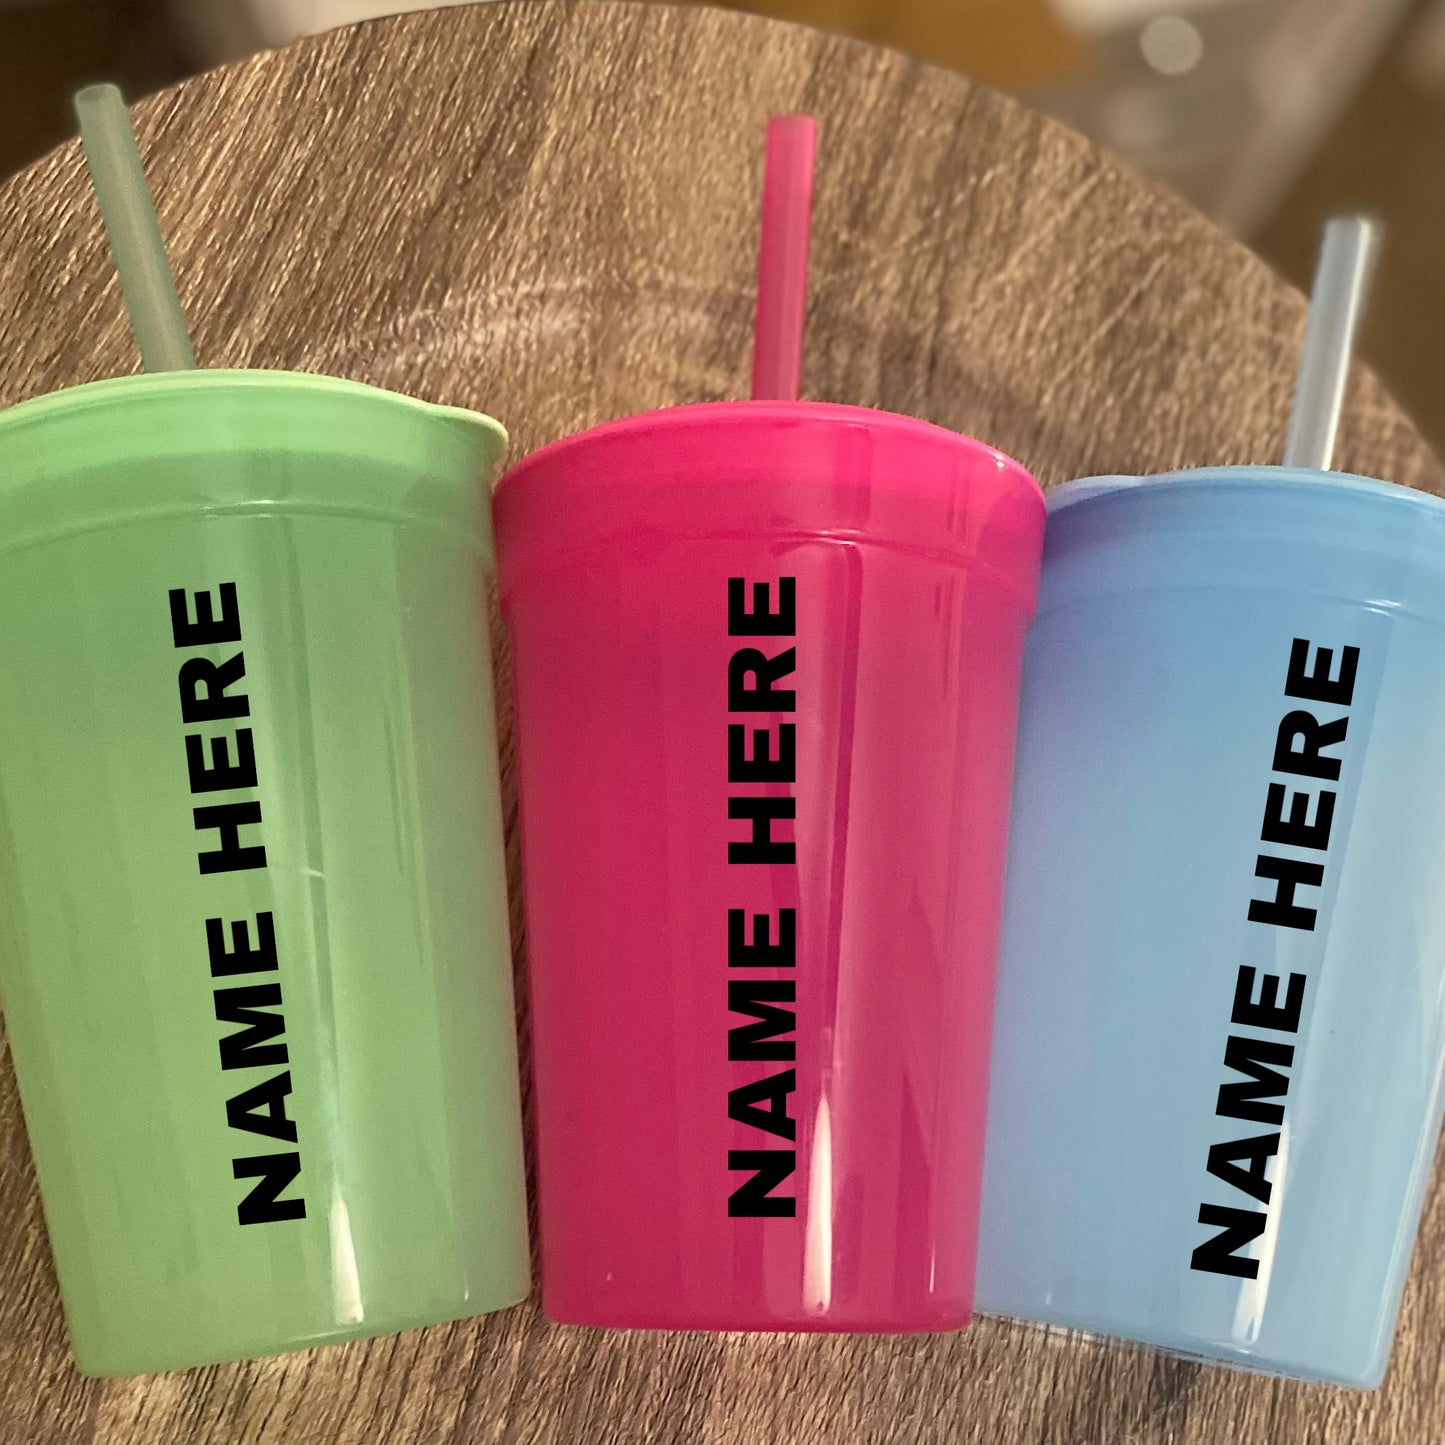 Winnie Cow Kids Color Changing Cup